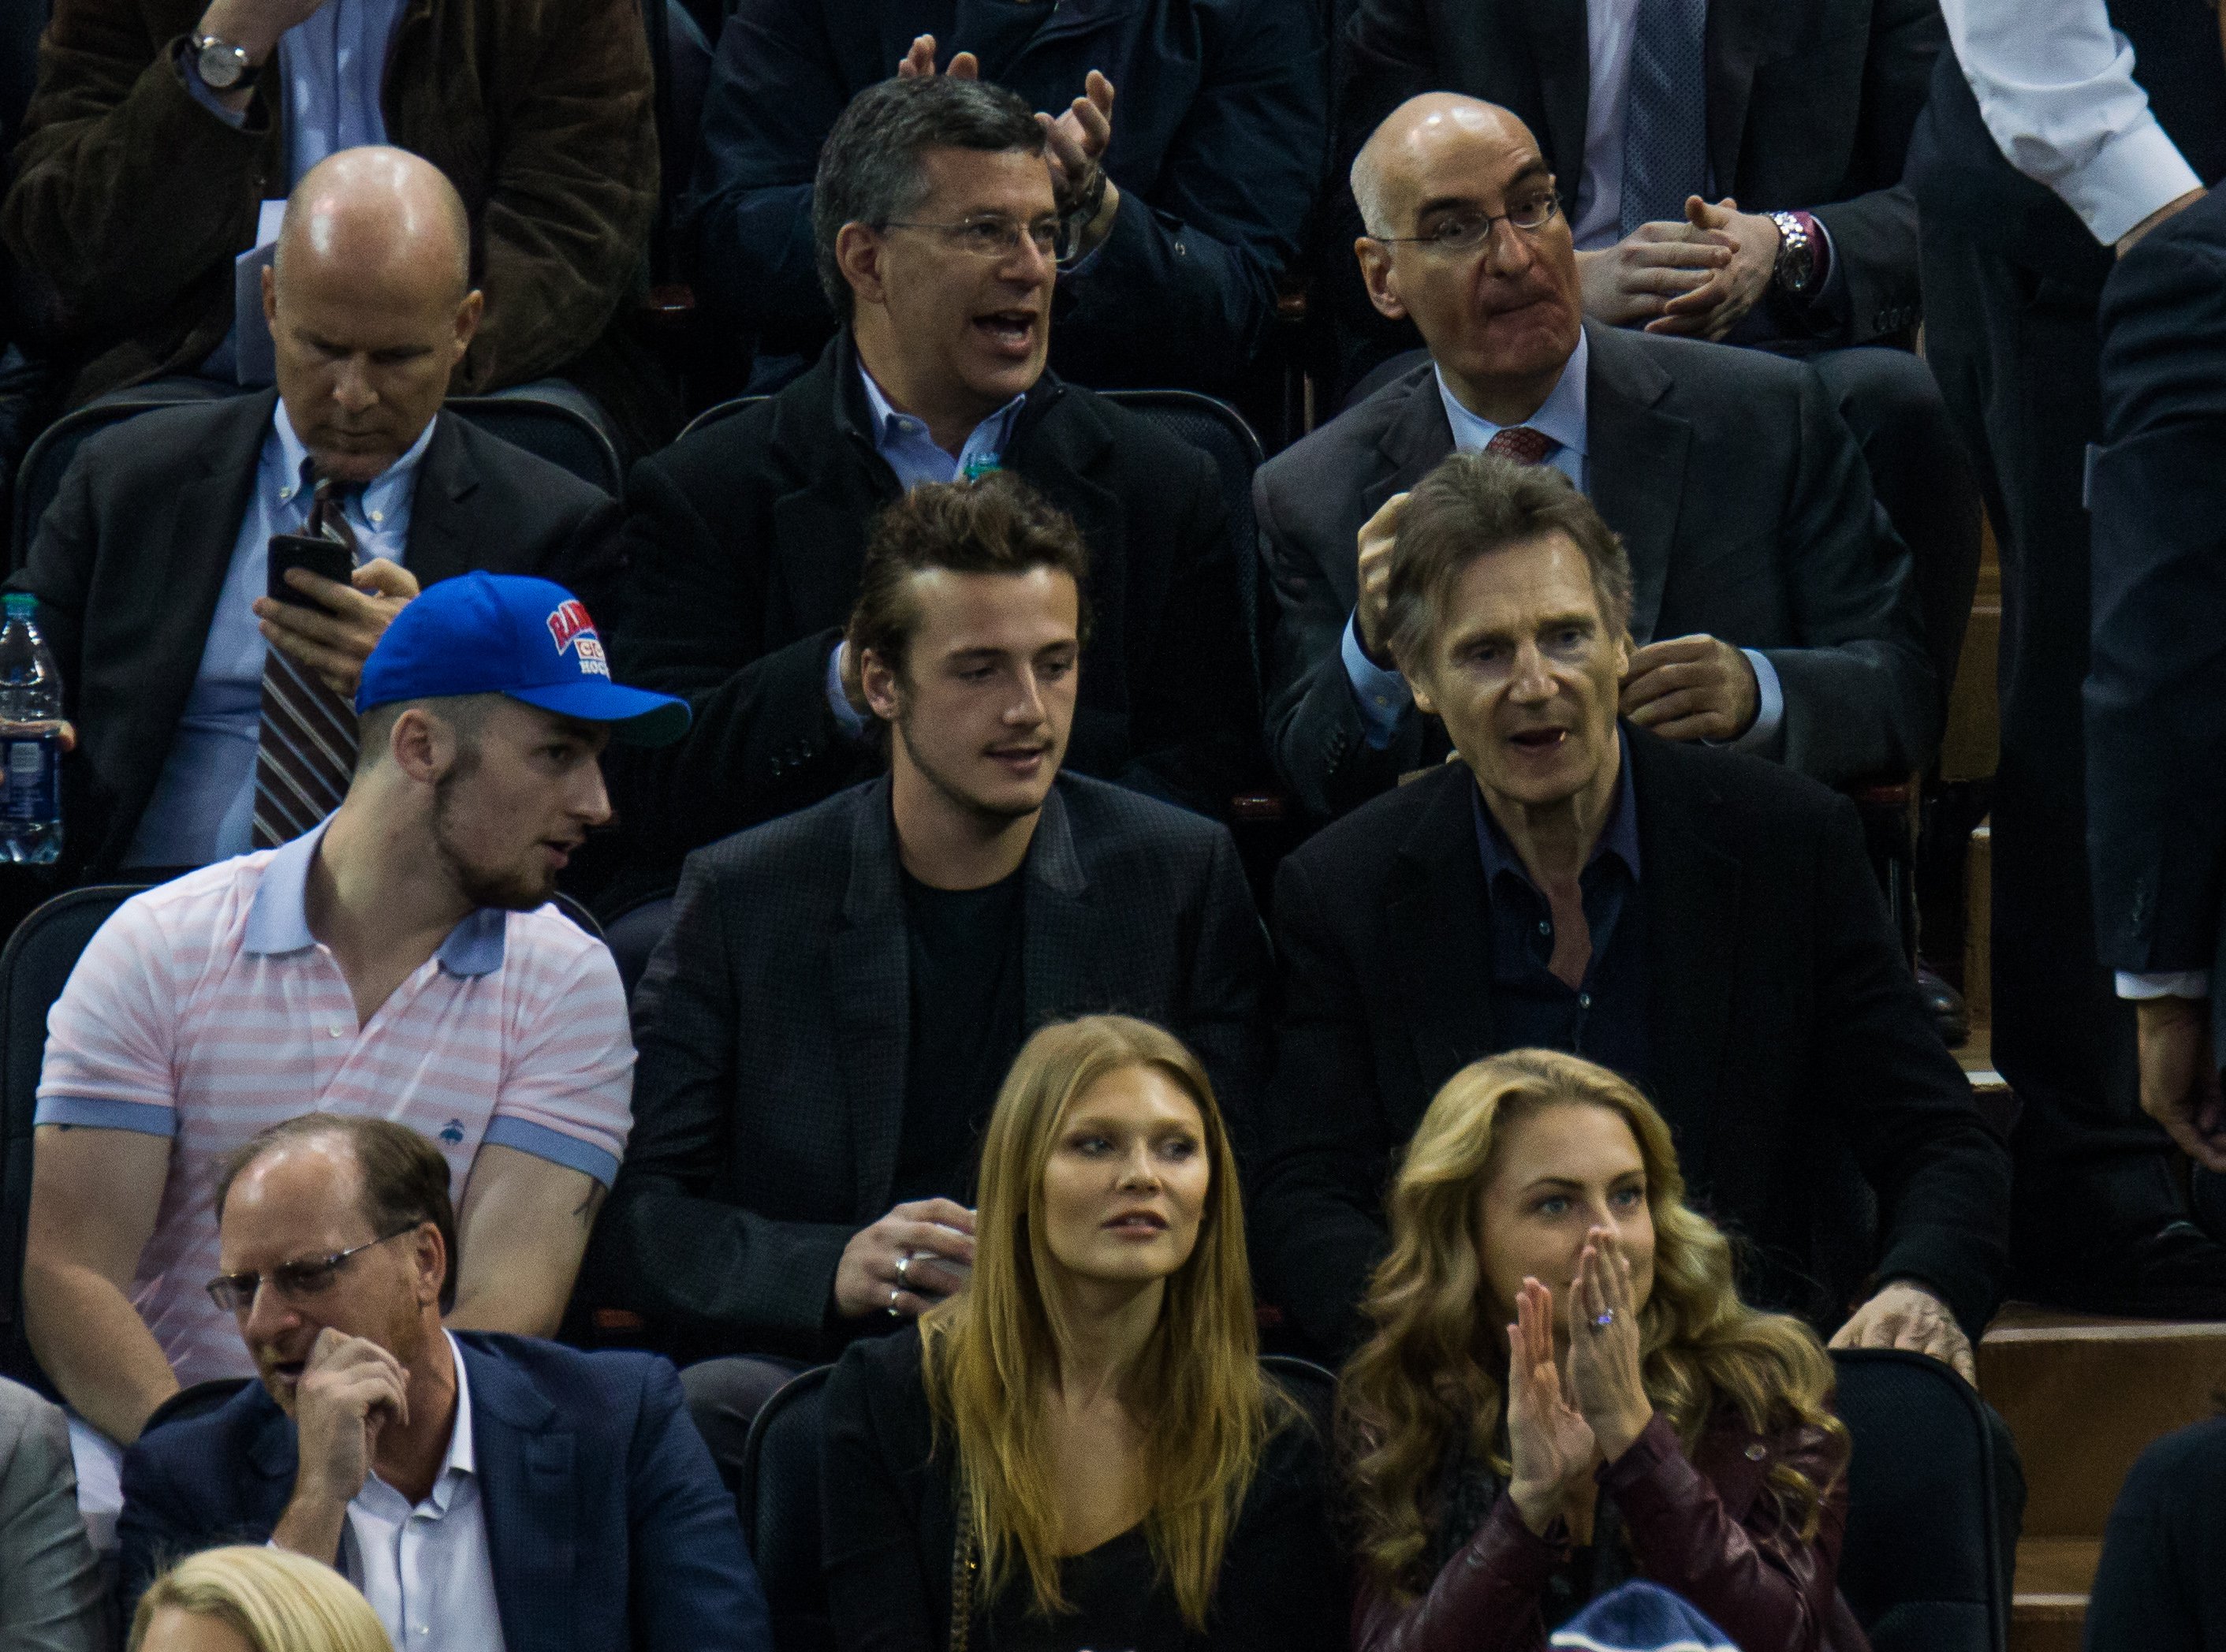 Liam Neeson and his sons Daniel Neeson, and Micheal Neeson during New York Rangers Vs. Boston Bruins game at Madison Square Garden on March 23, 2016 in New York City. / Source: Getty Images